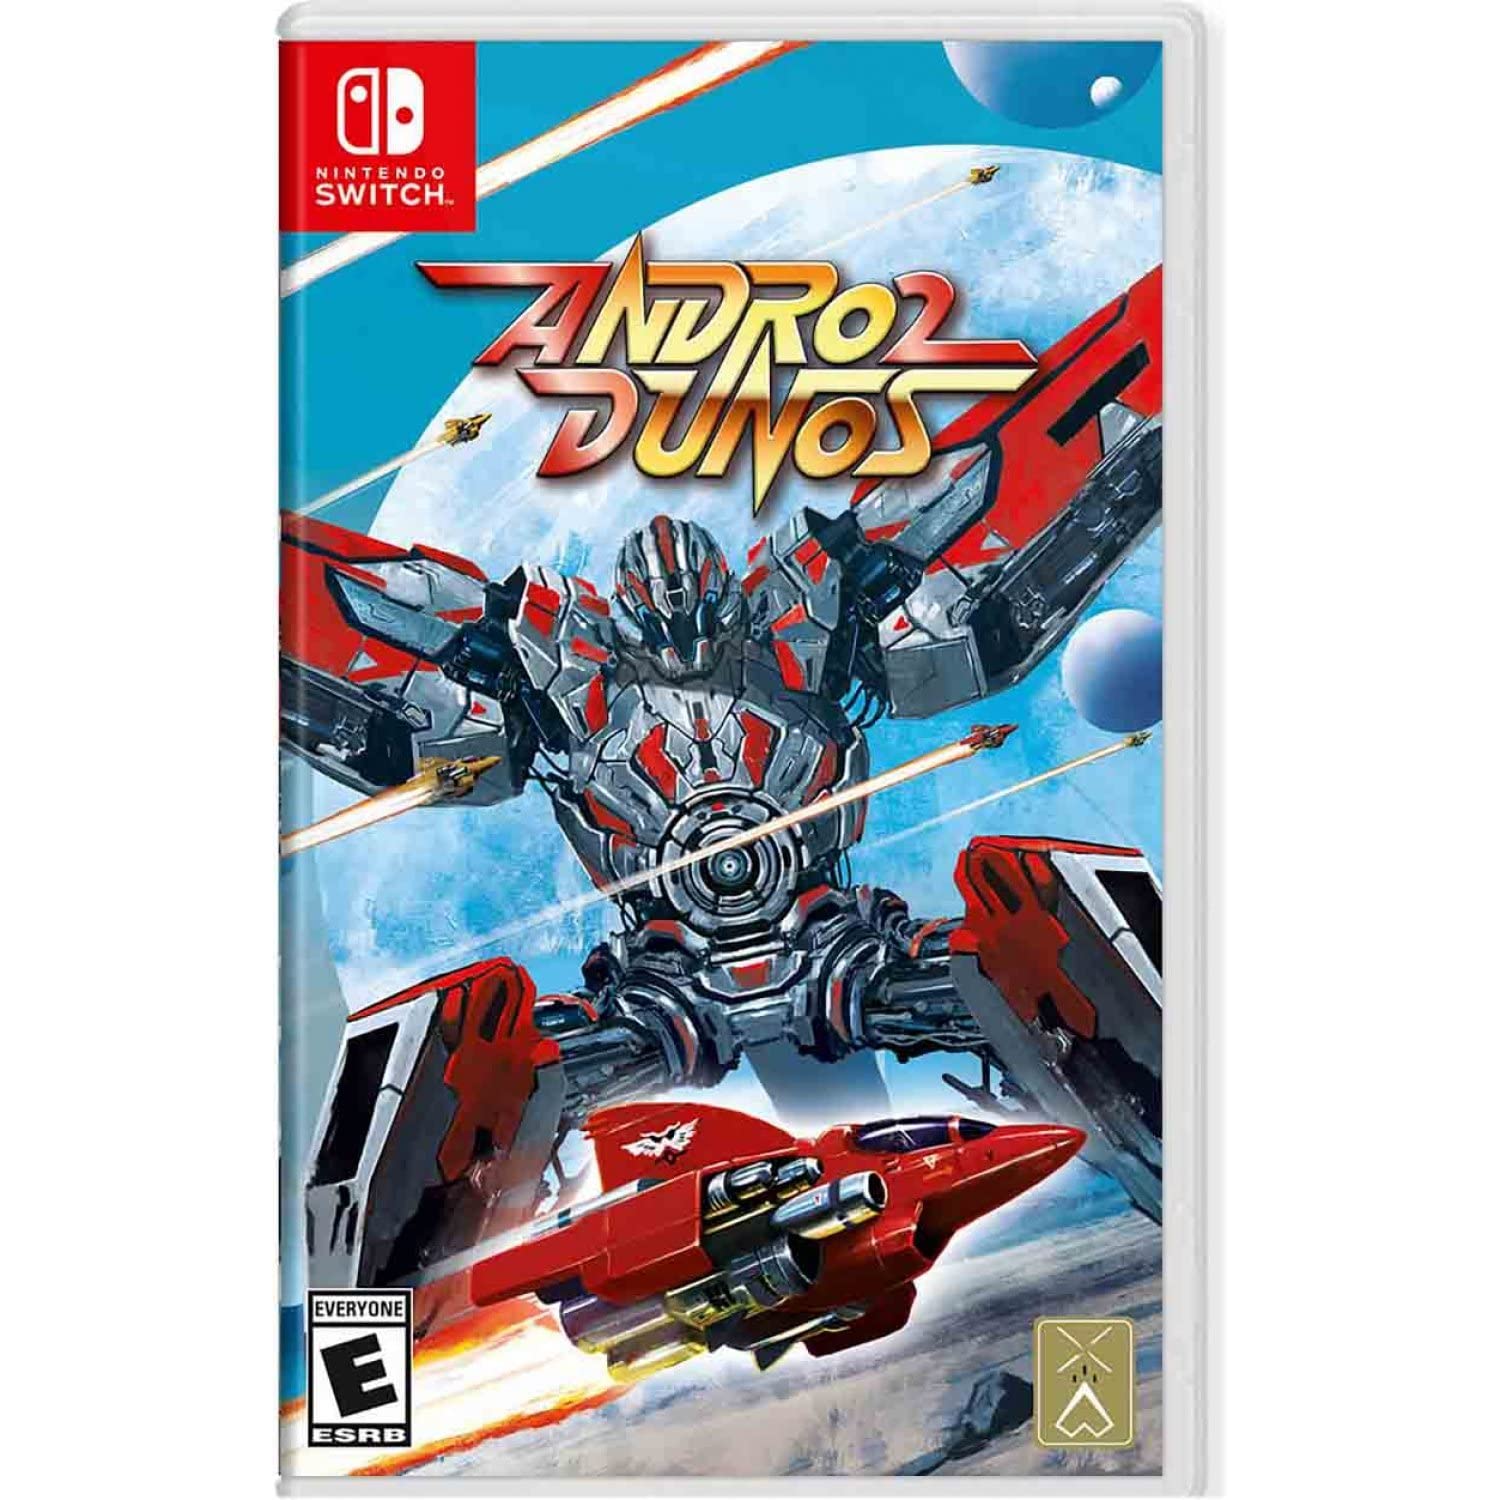 Andro Dunos 2 for Nintendo Switch